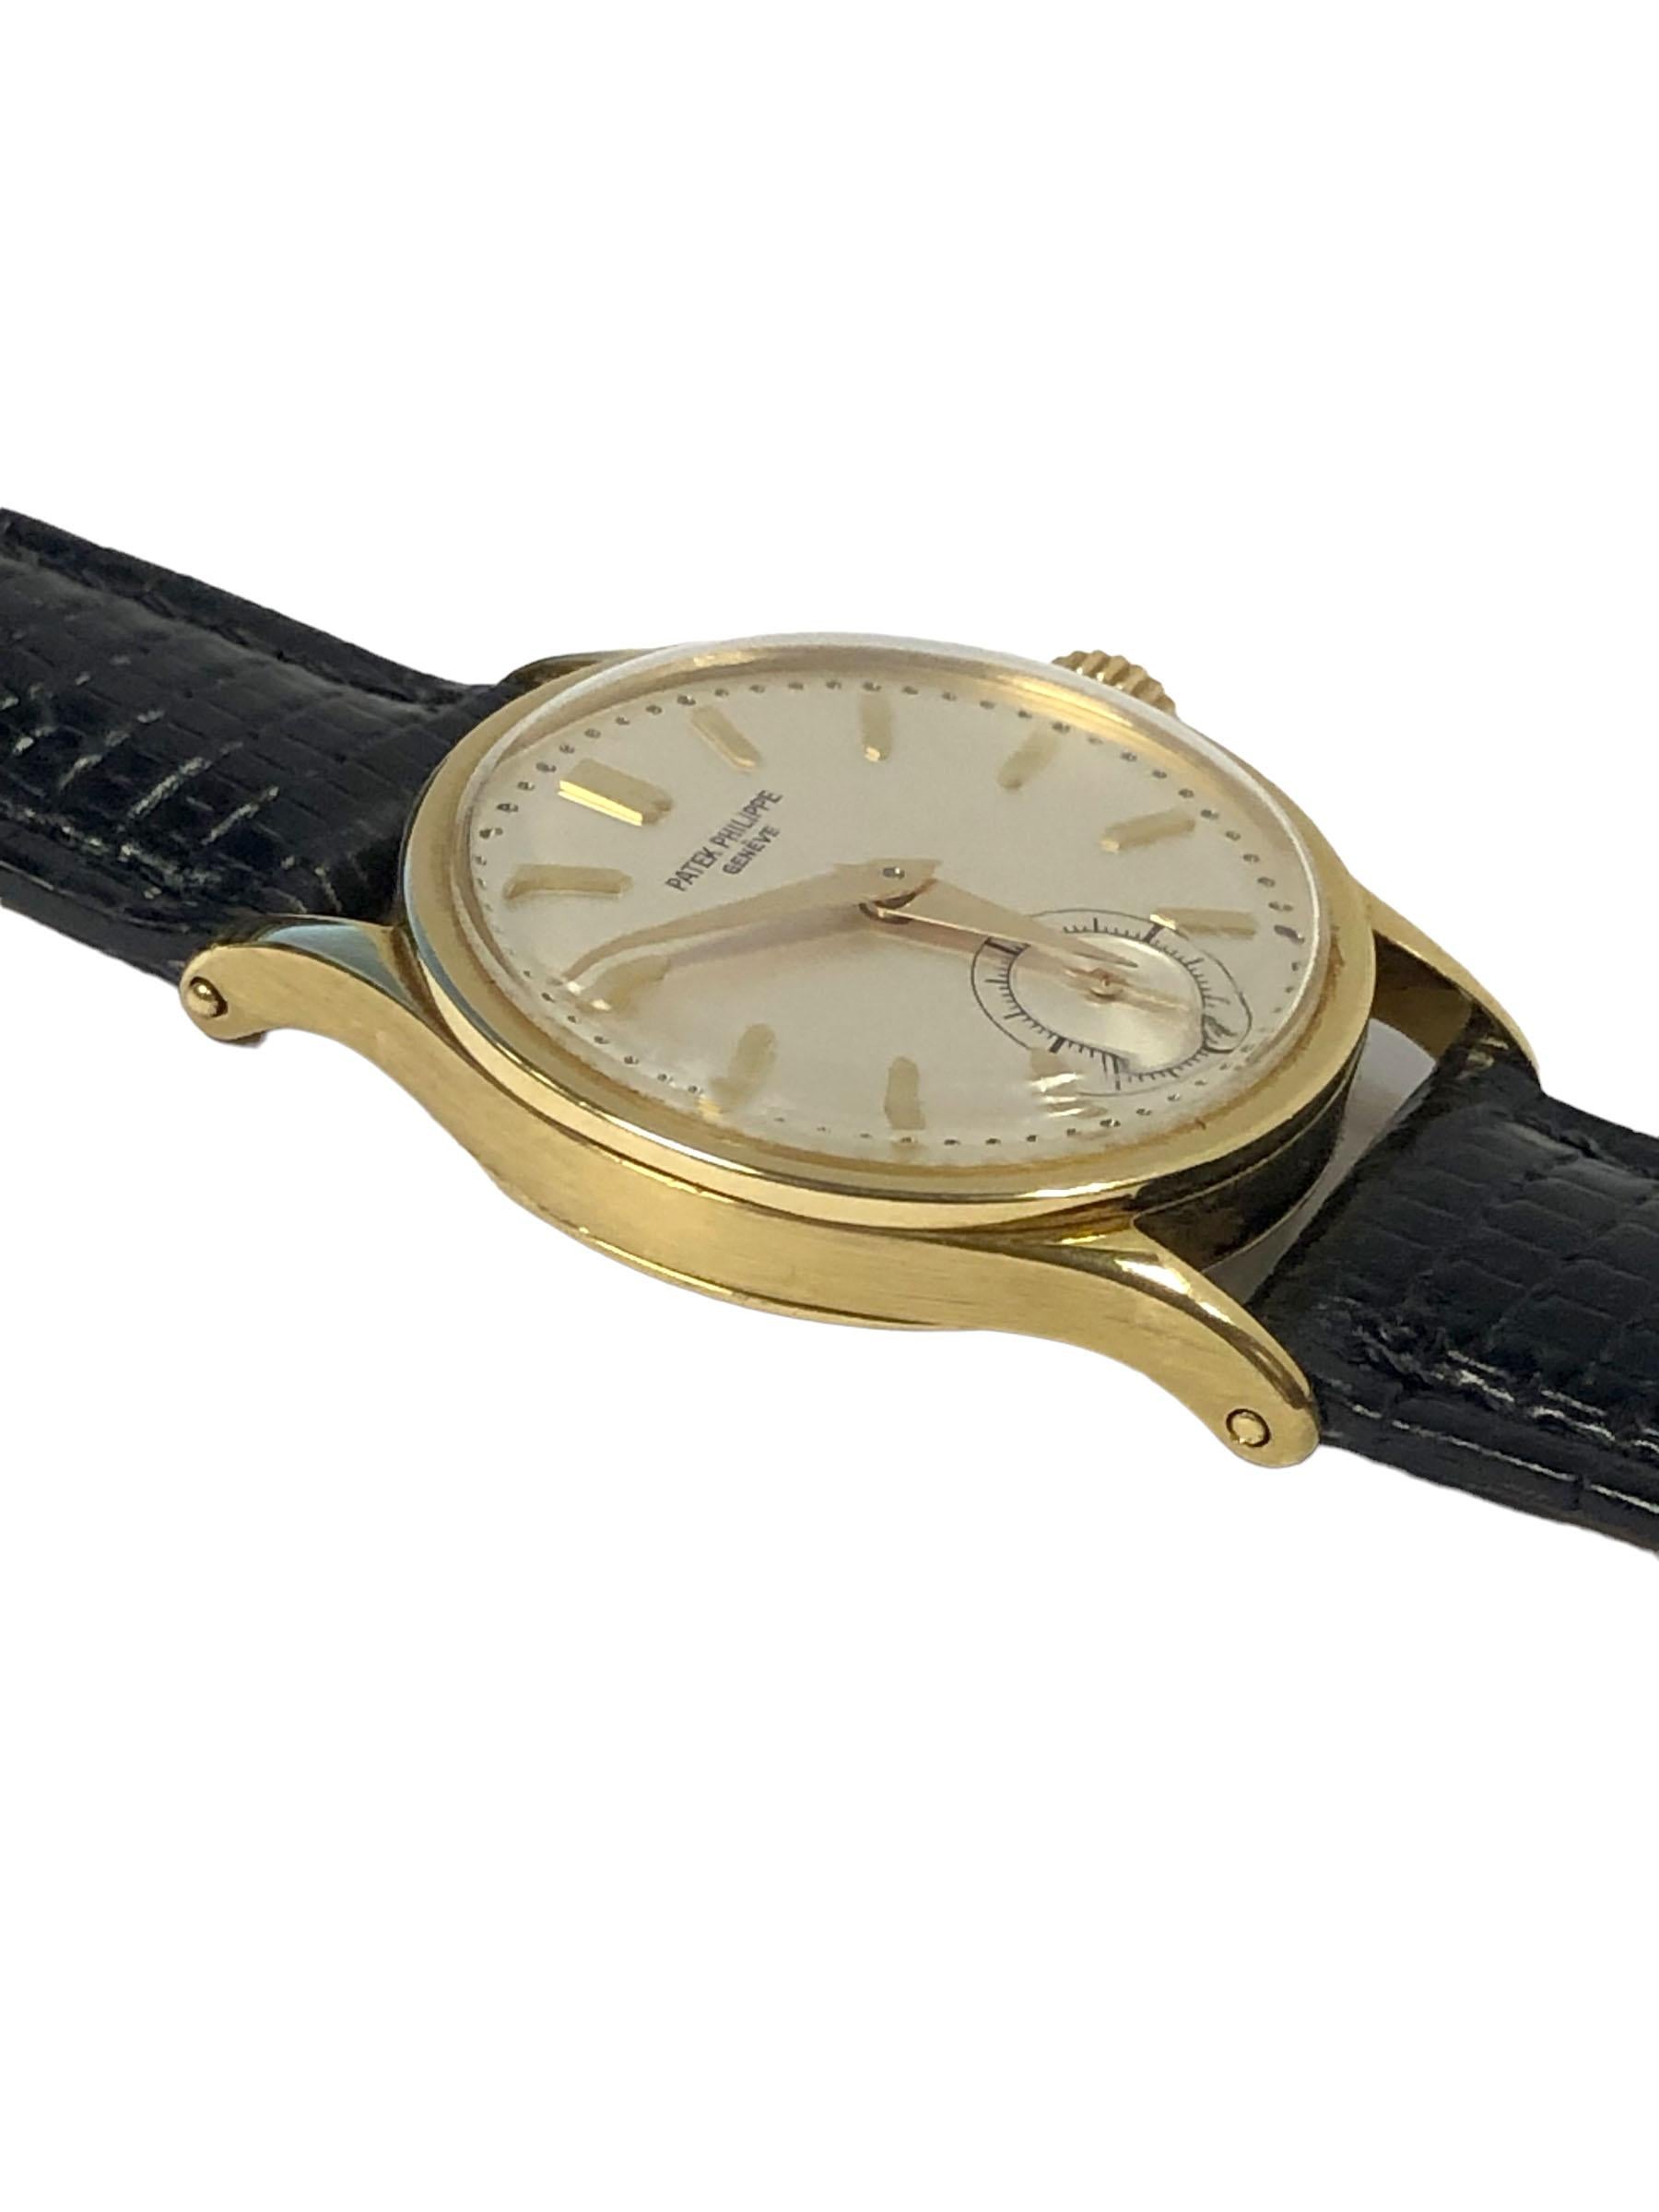 Circa 1945 Patek Philippe Reference 96 Calatrava Wrist Watch, 31 M.M. diameter x  7.5 M.M. thick 3 piece case. 18 Jewel Nickle Lever Mechanical, Manual wind movement, mint condition Silver Satin dial with Raised Gold markers and a sub seconds hand,